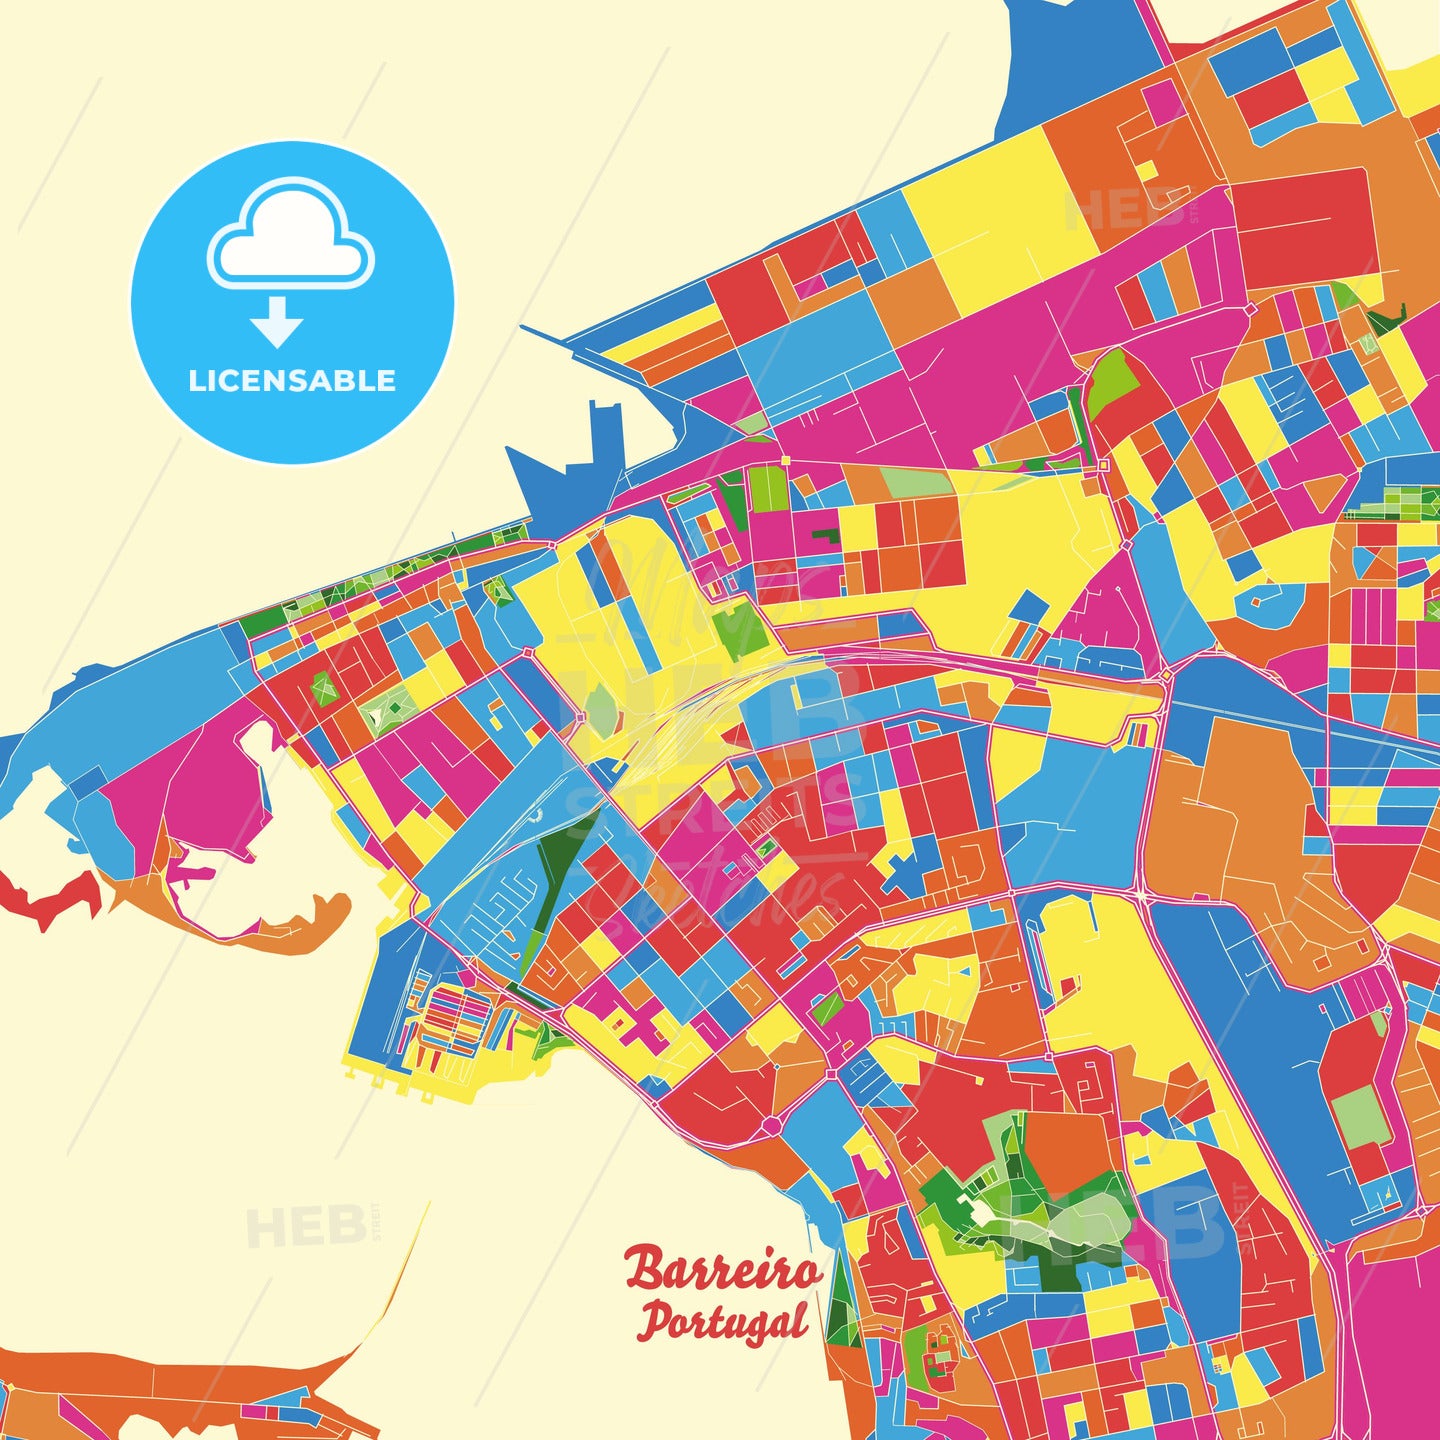 Barreiro, Portugal Crazy Colorful Street Map Poster Template - HEBSTREITS Sketches